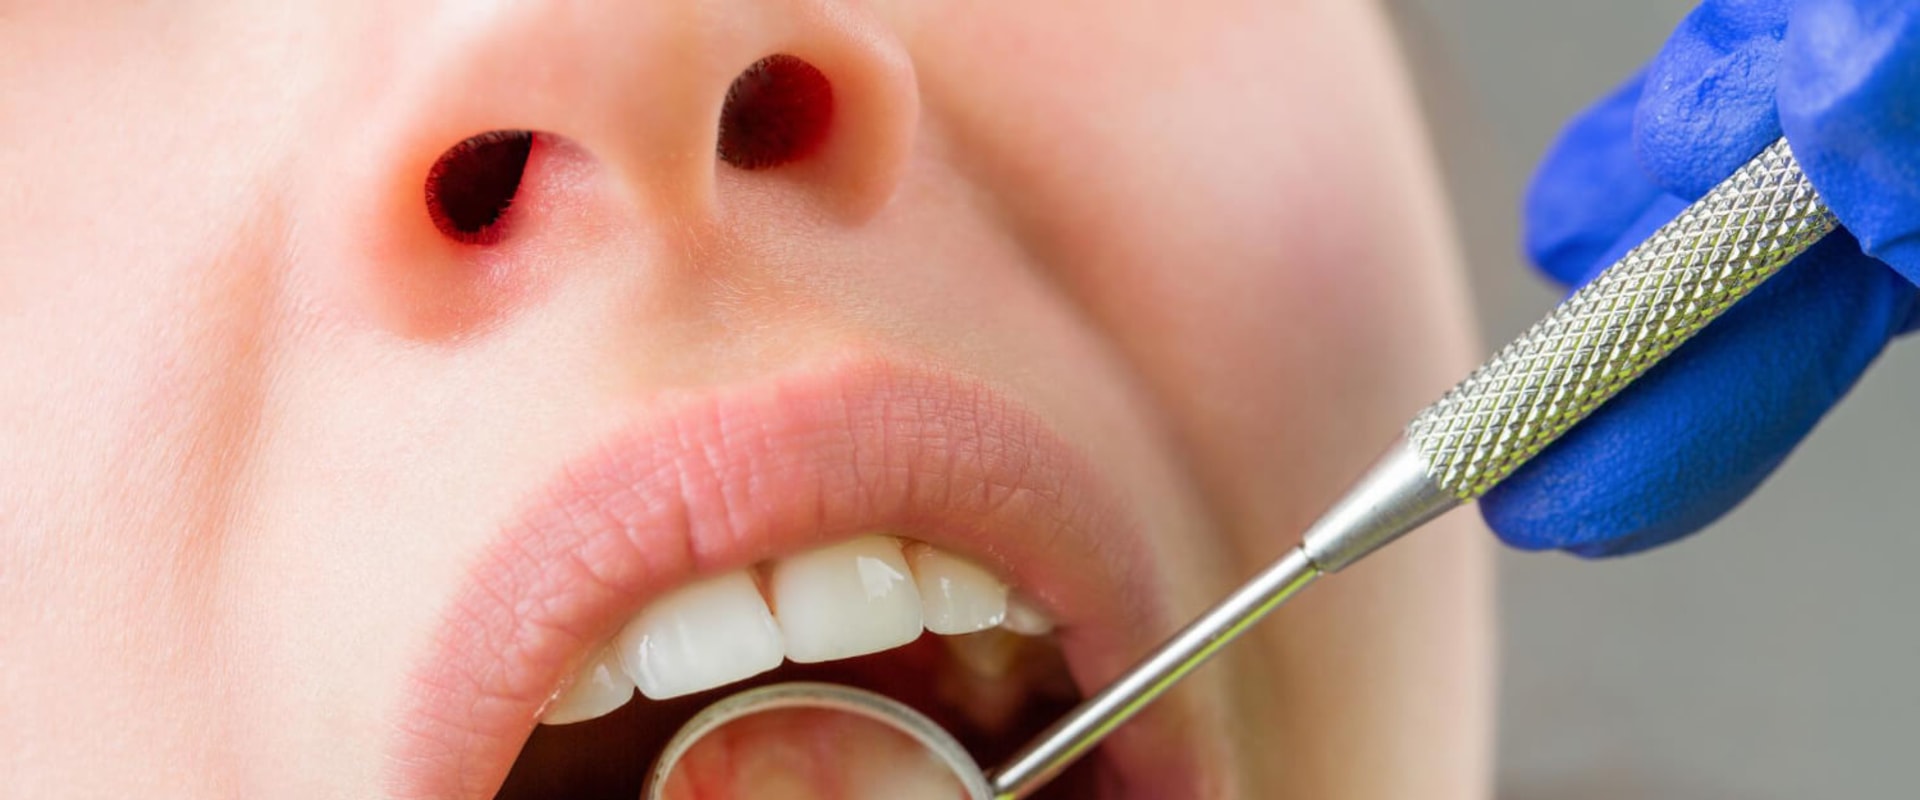 10 Important Questions to Ask During Your Endodontist Consultation